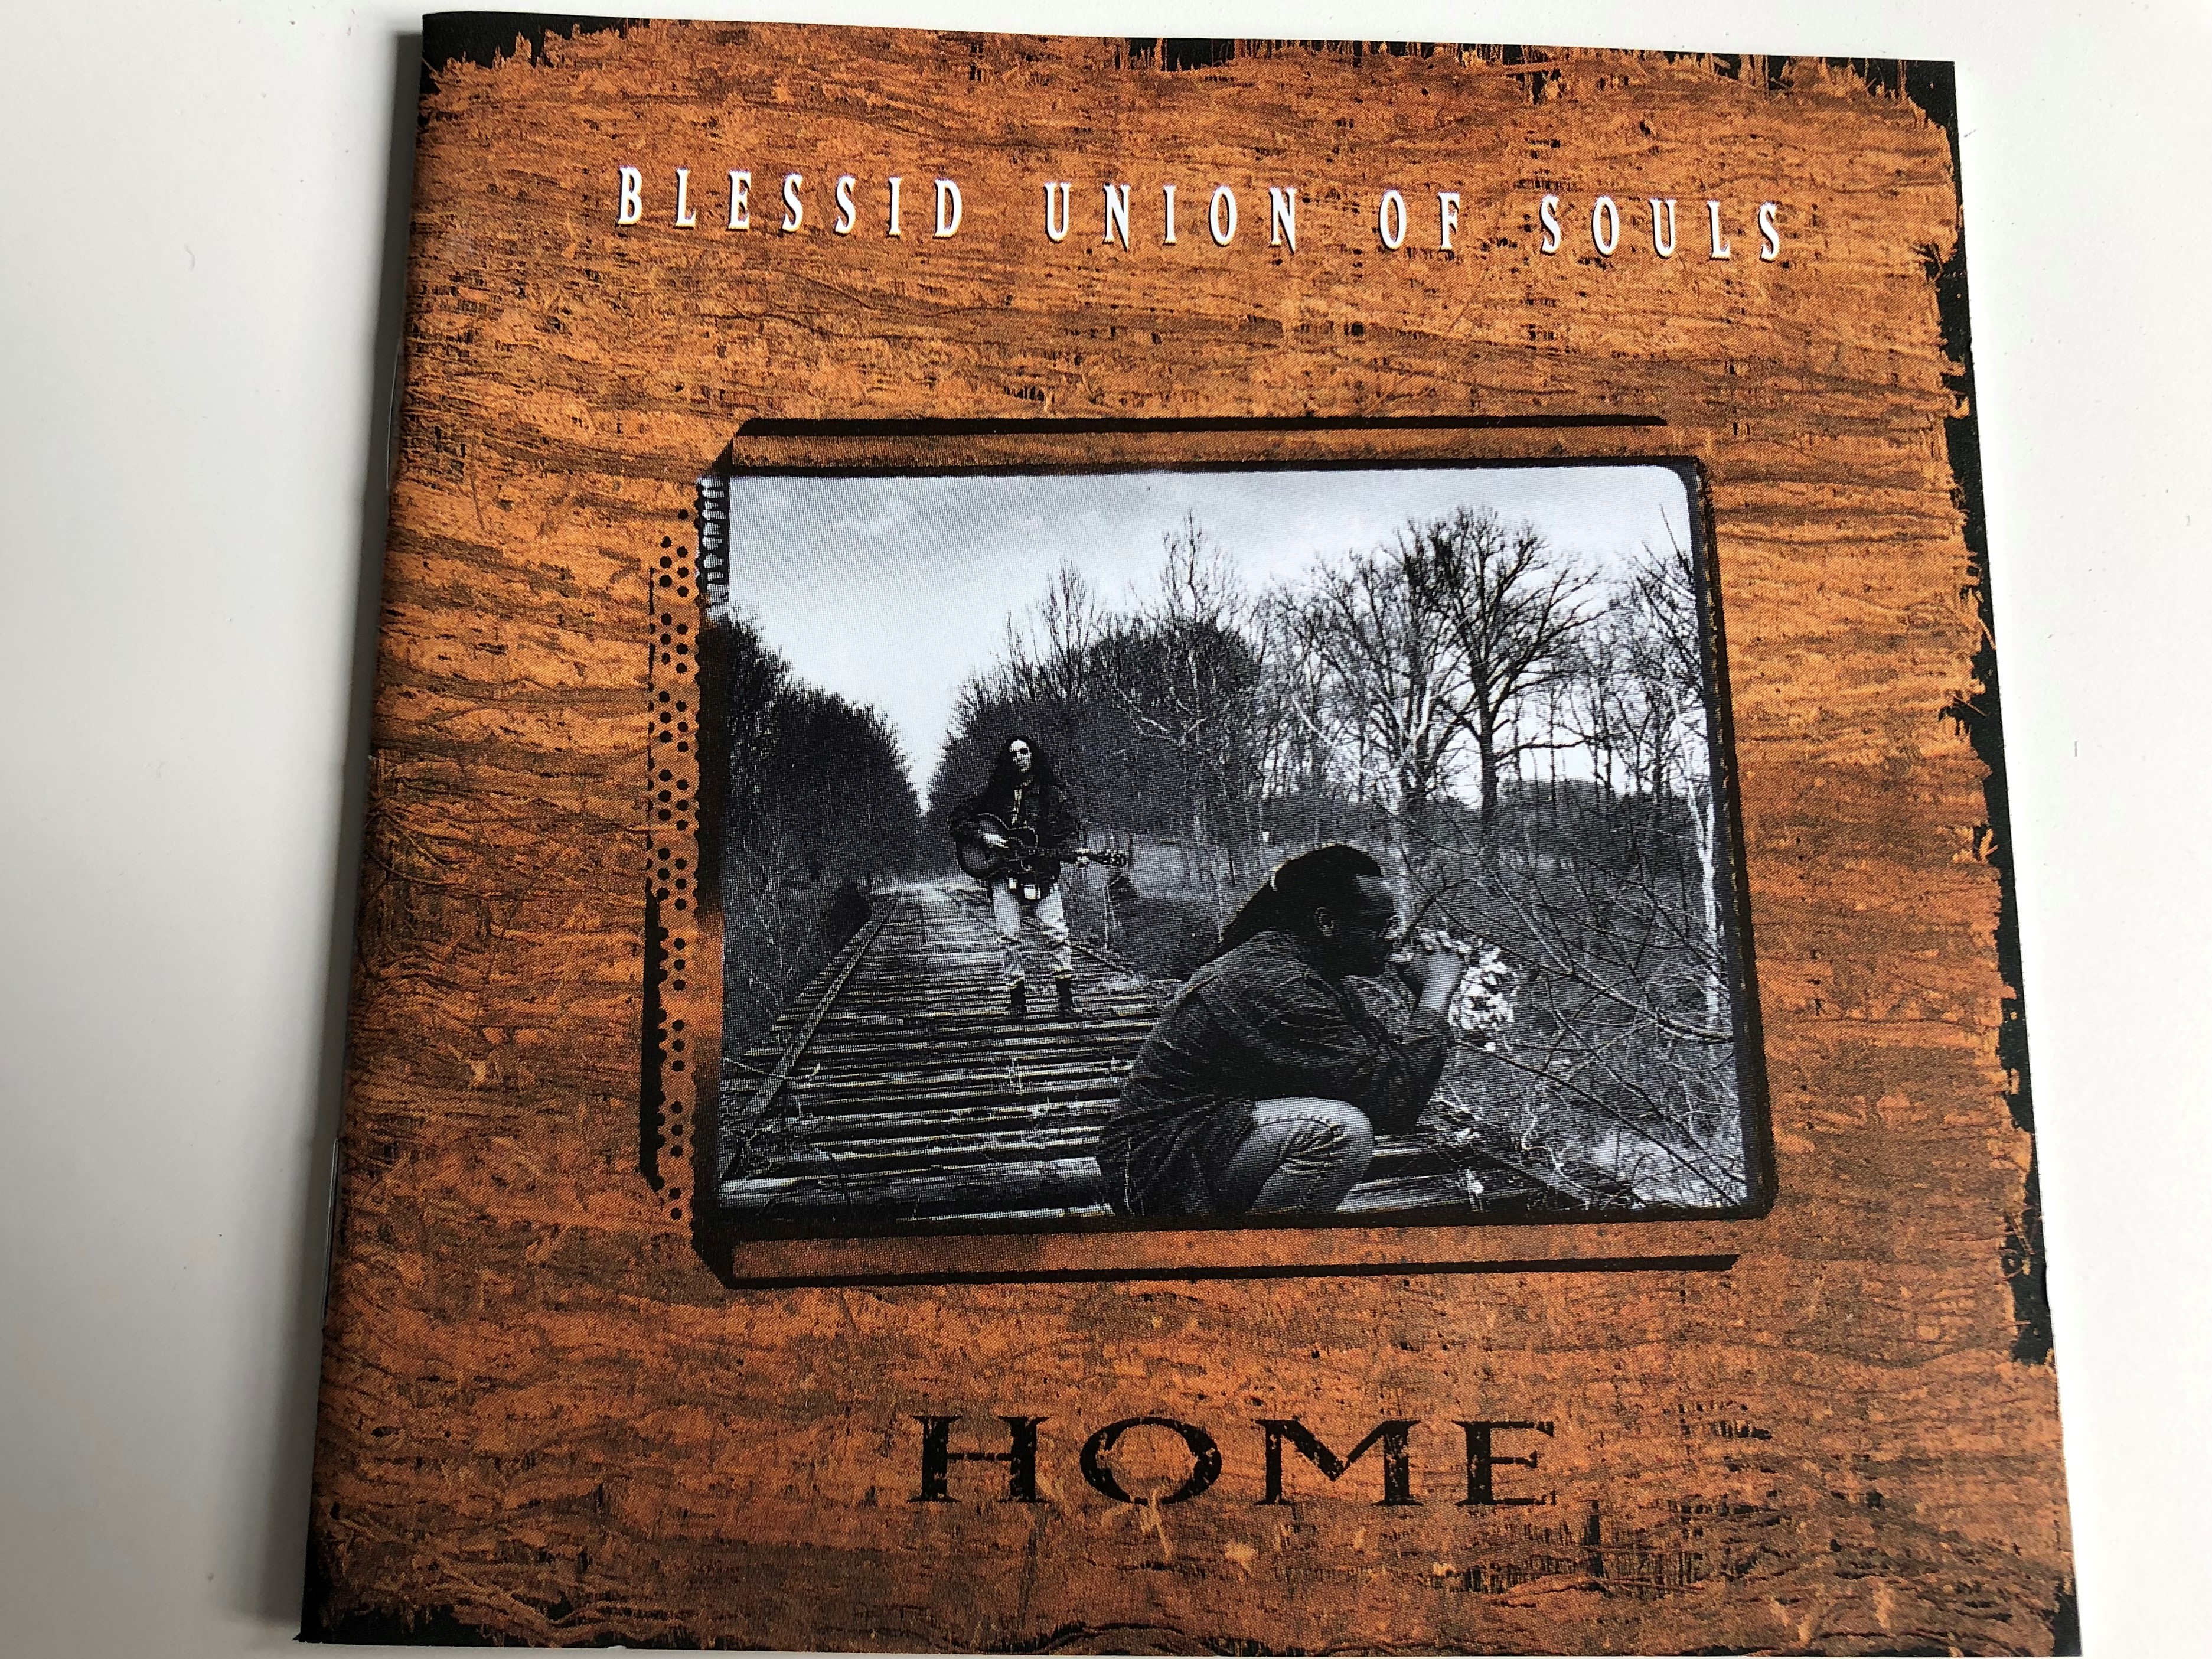 blessid-union-of-souls-home-i-believe-all-along-oh-virginia-home-end-of-the-world-heaven-audio-cd-1995-emi-records-1-.jpg